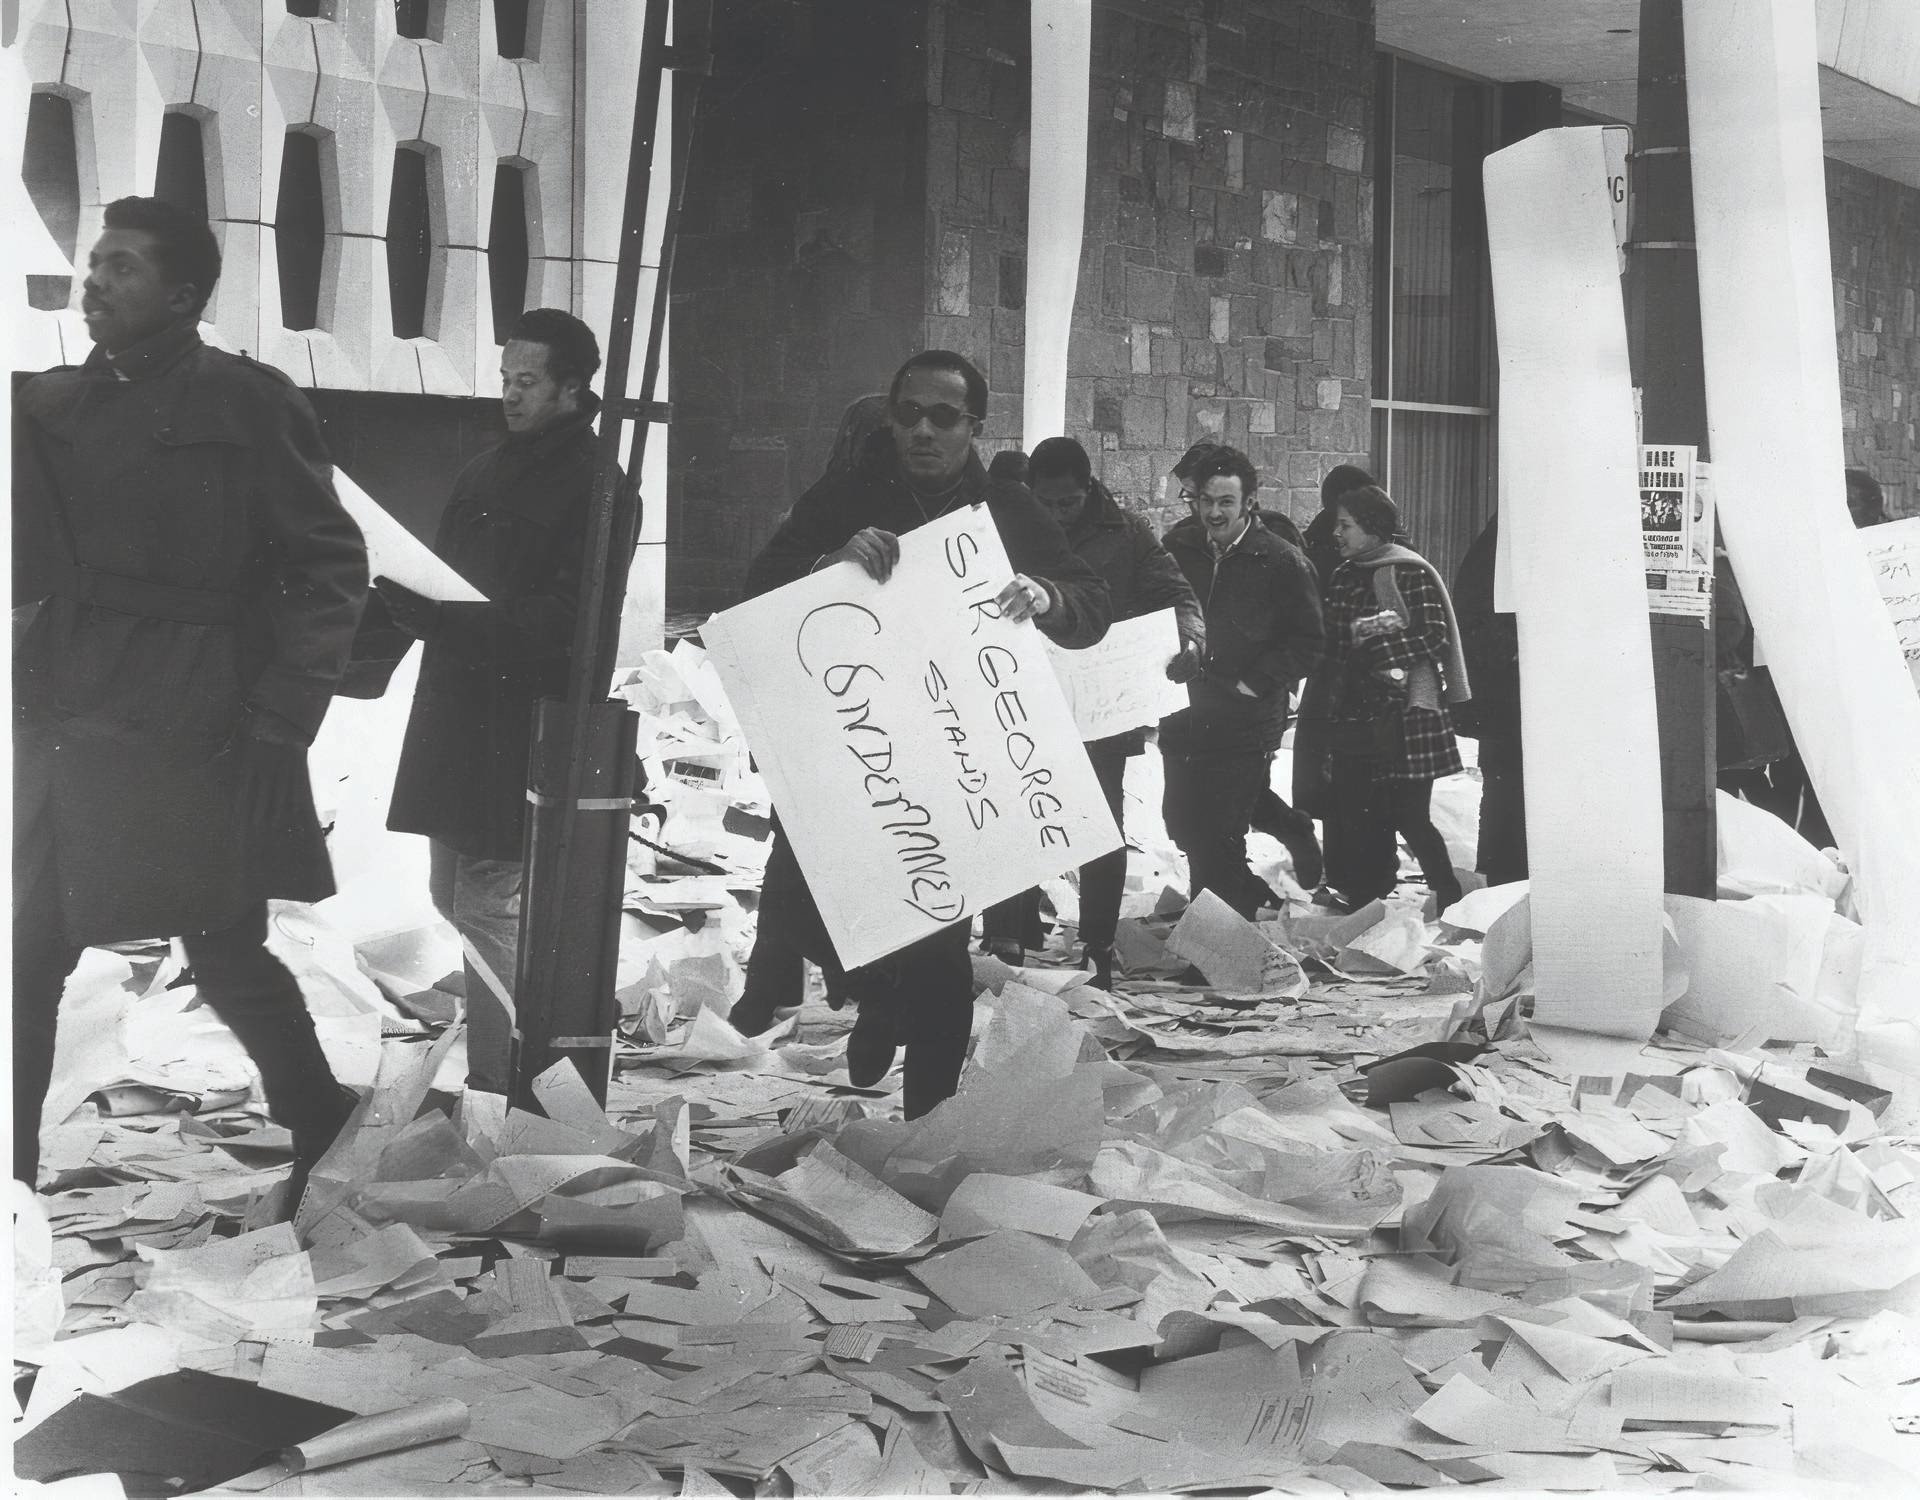 Protesters walk past the Hall Building, the ground and street posts littered with computer paper